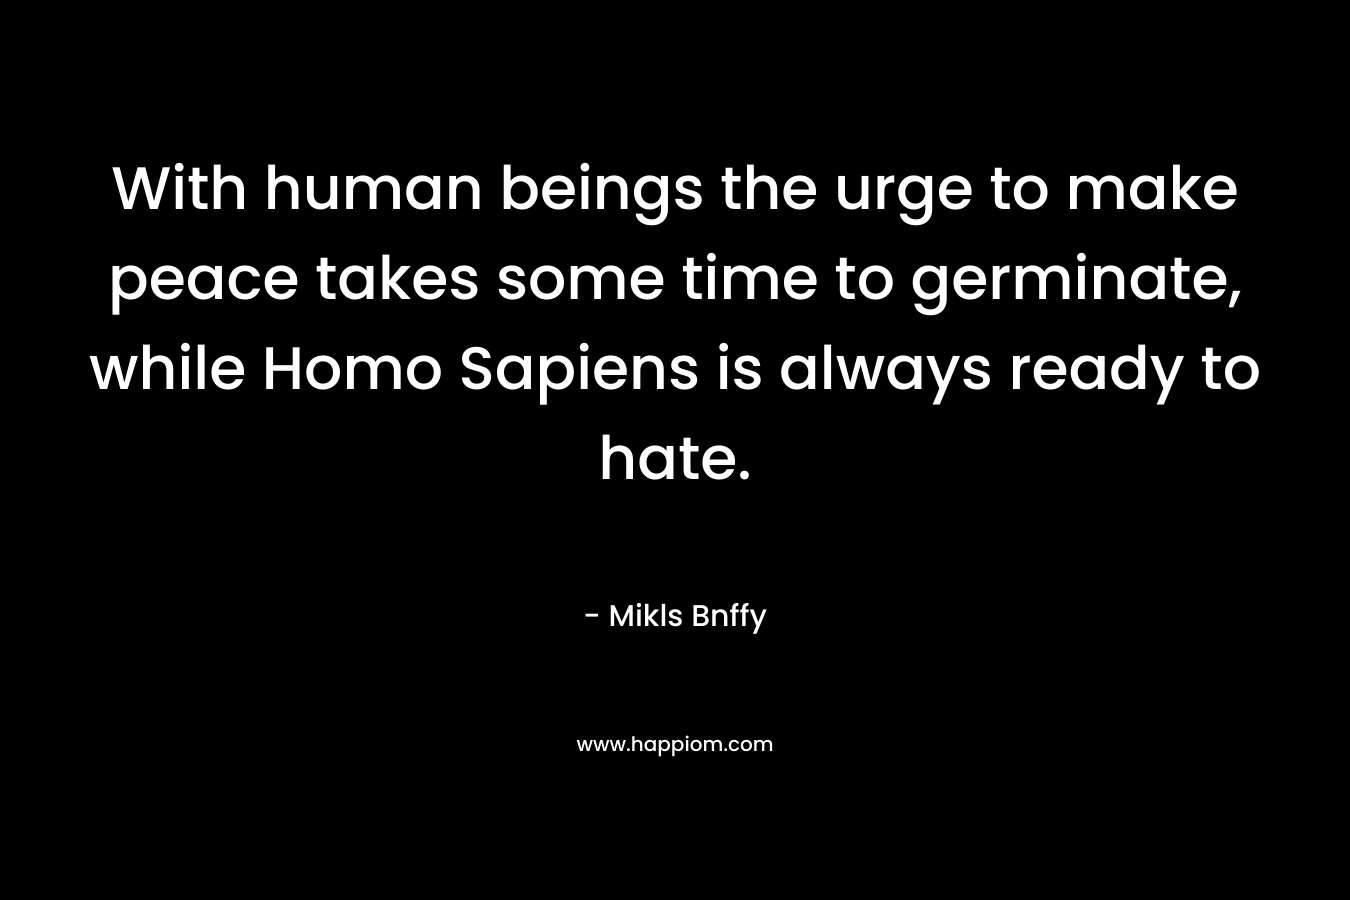 With human beings the urge to make peace takes some time to germinate, while Homo Sapiens is always ready to hate. – Mikls Bnffy